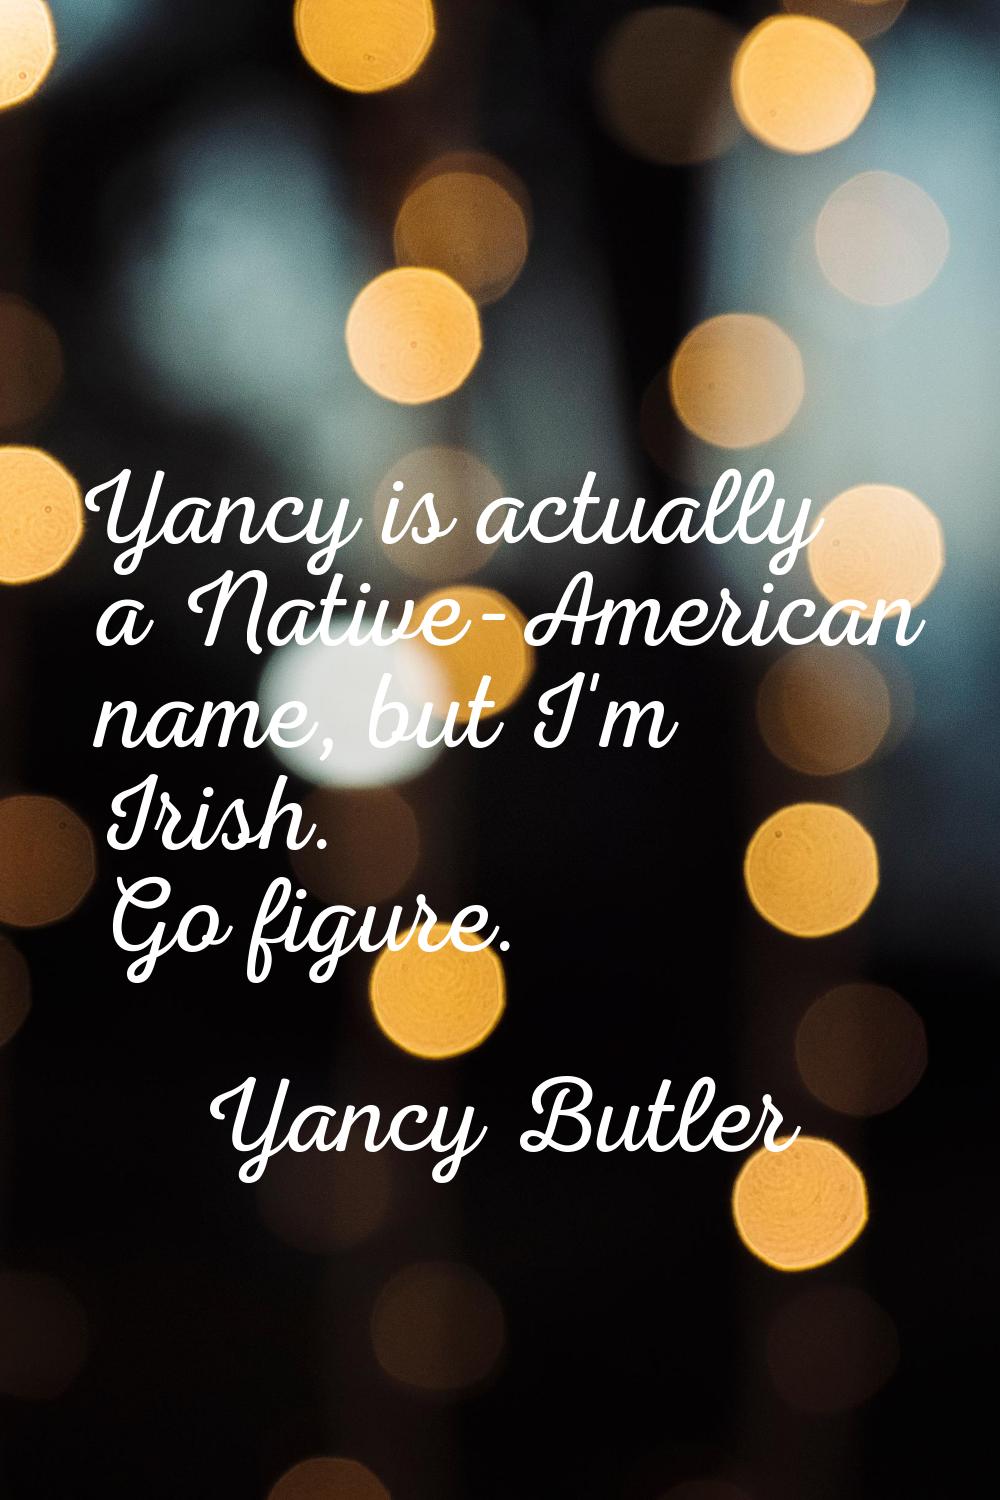 Yancy is actually a Native-American name, but I'm Irish. Go figure.